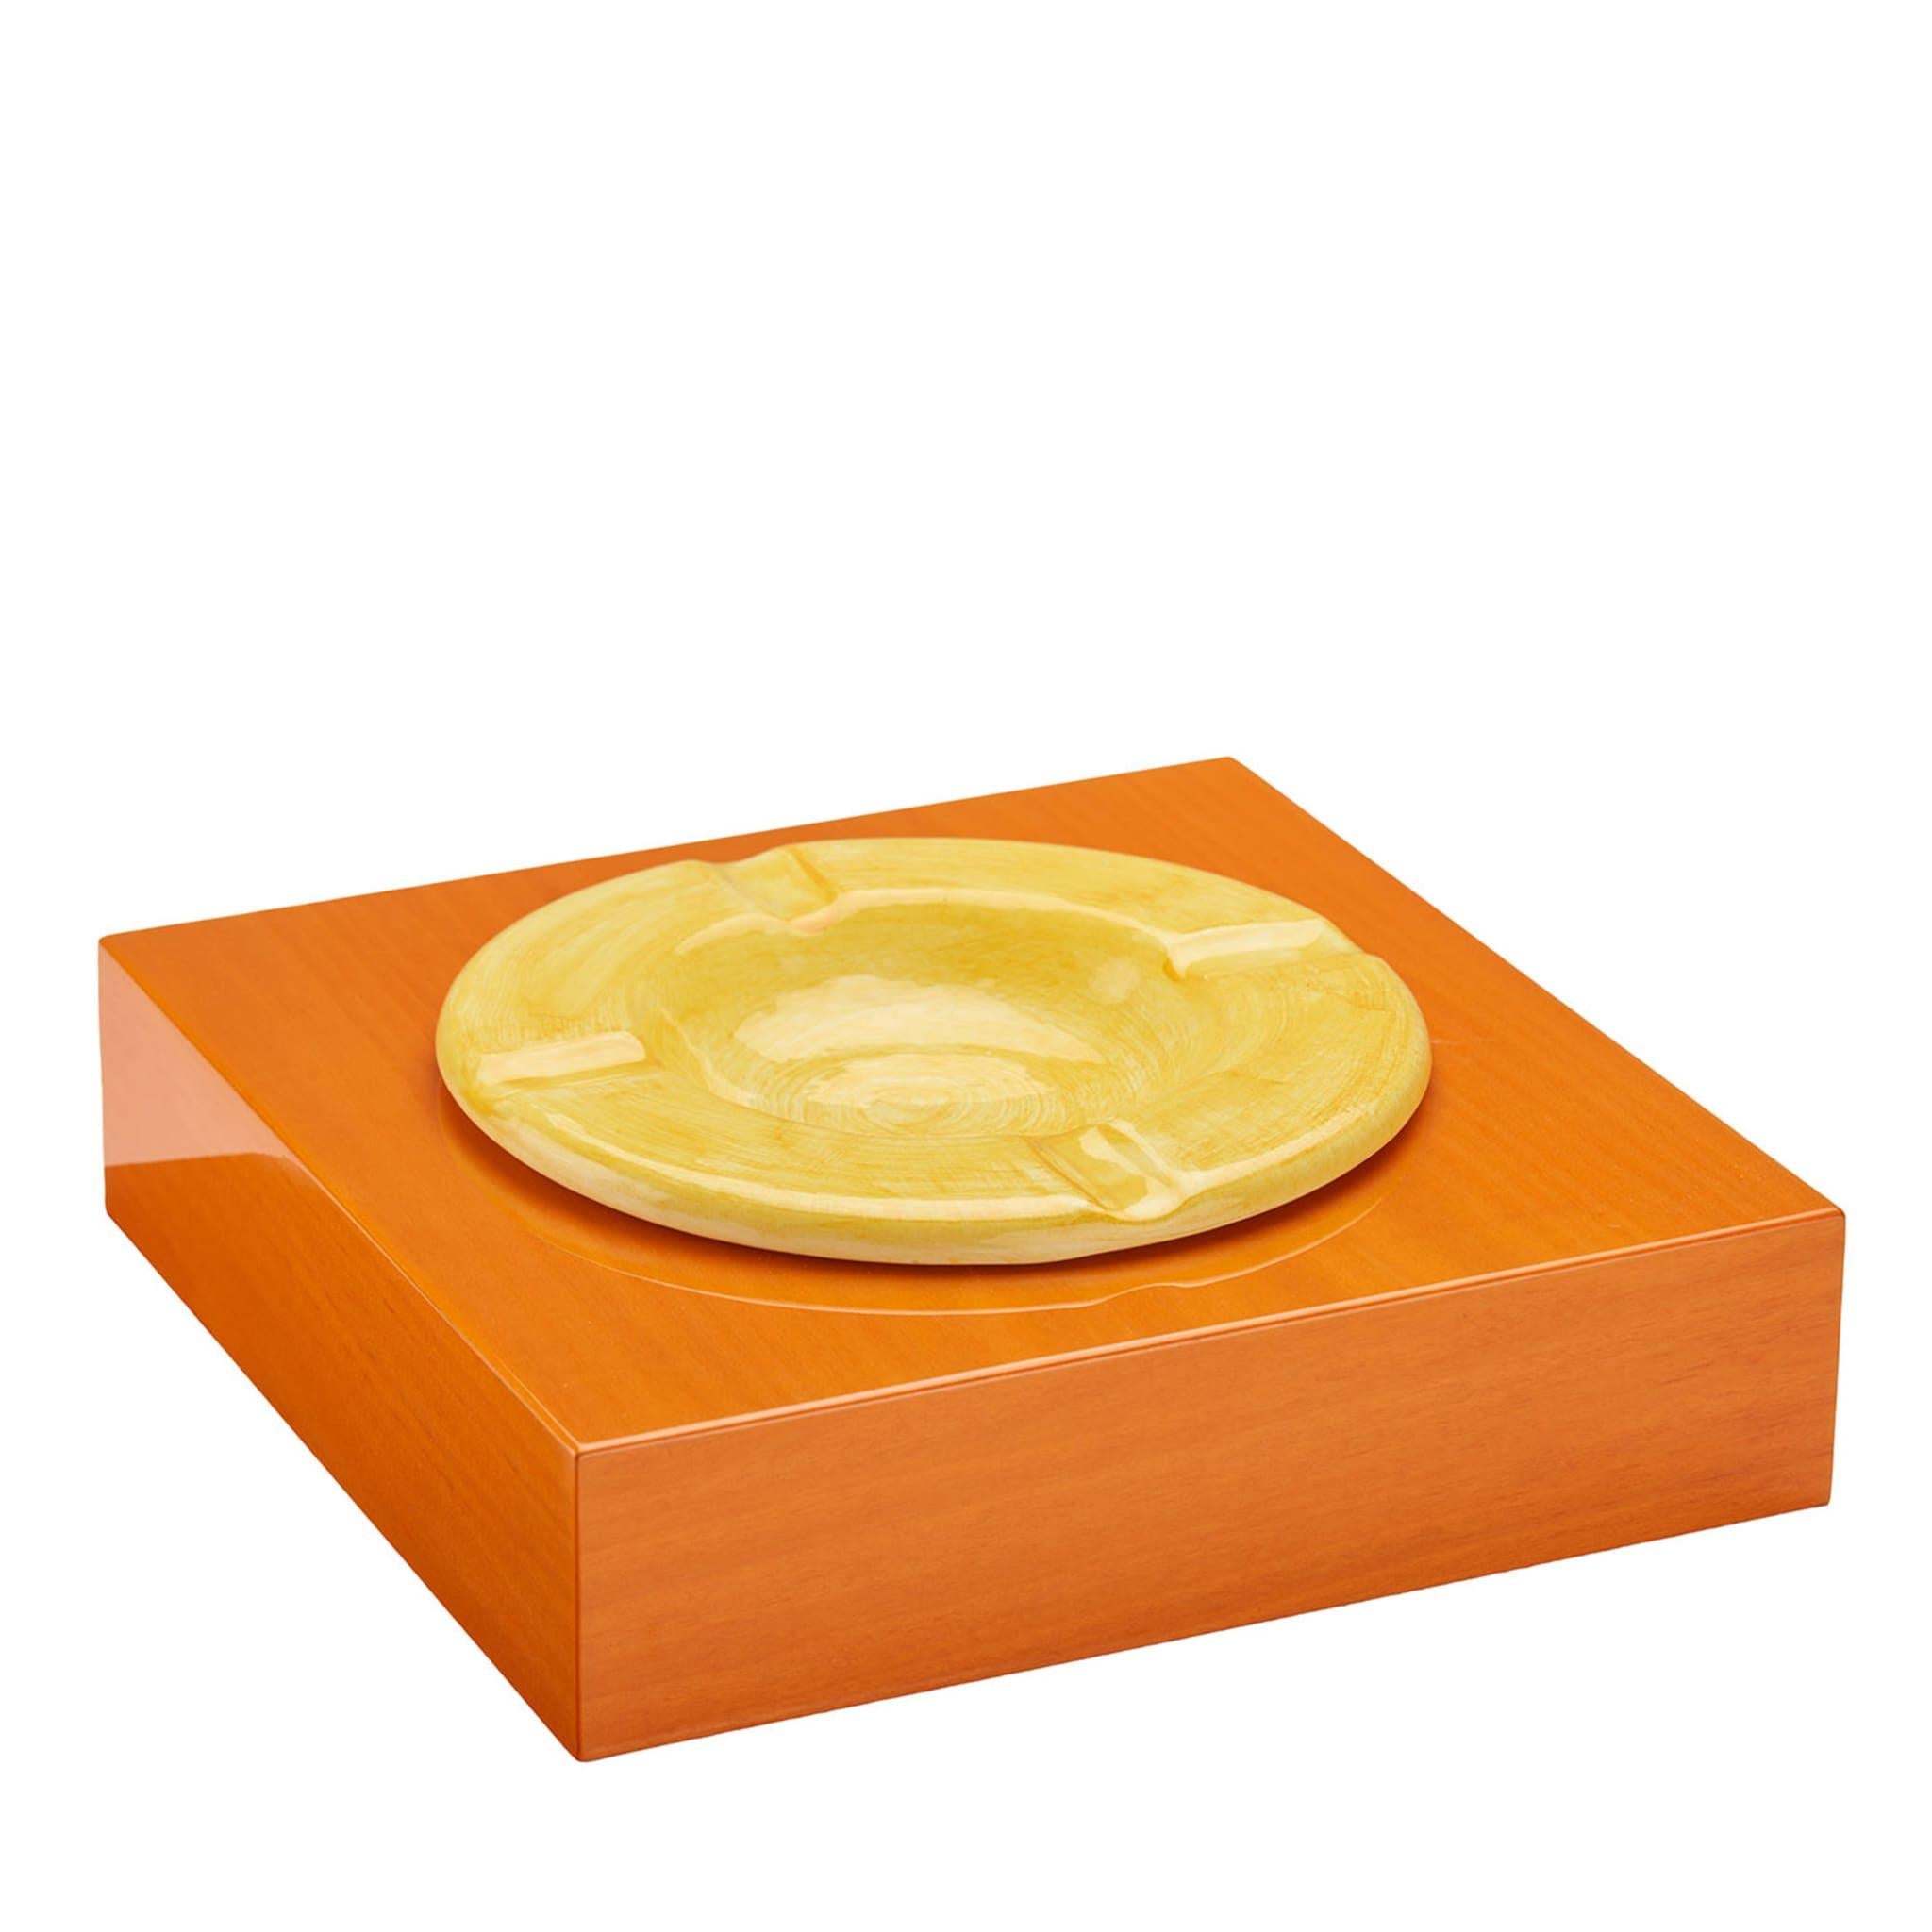 An everyday object becomes a refined piece of interior design in this splendid ashtray, a sublime display of artisanal craftsmanship. Showcasing natural veinings and grains through the polished orange and yellow paint decorating its square and clean